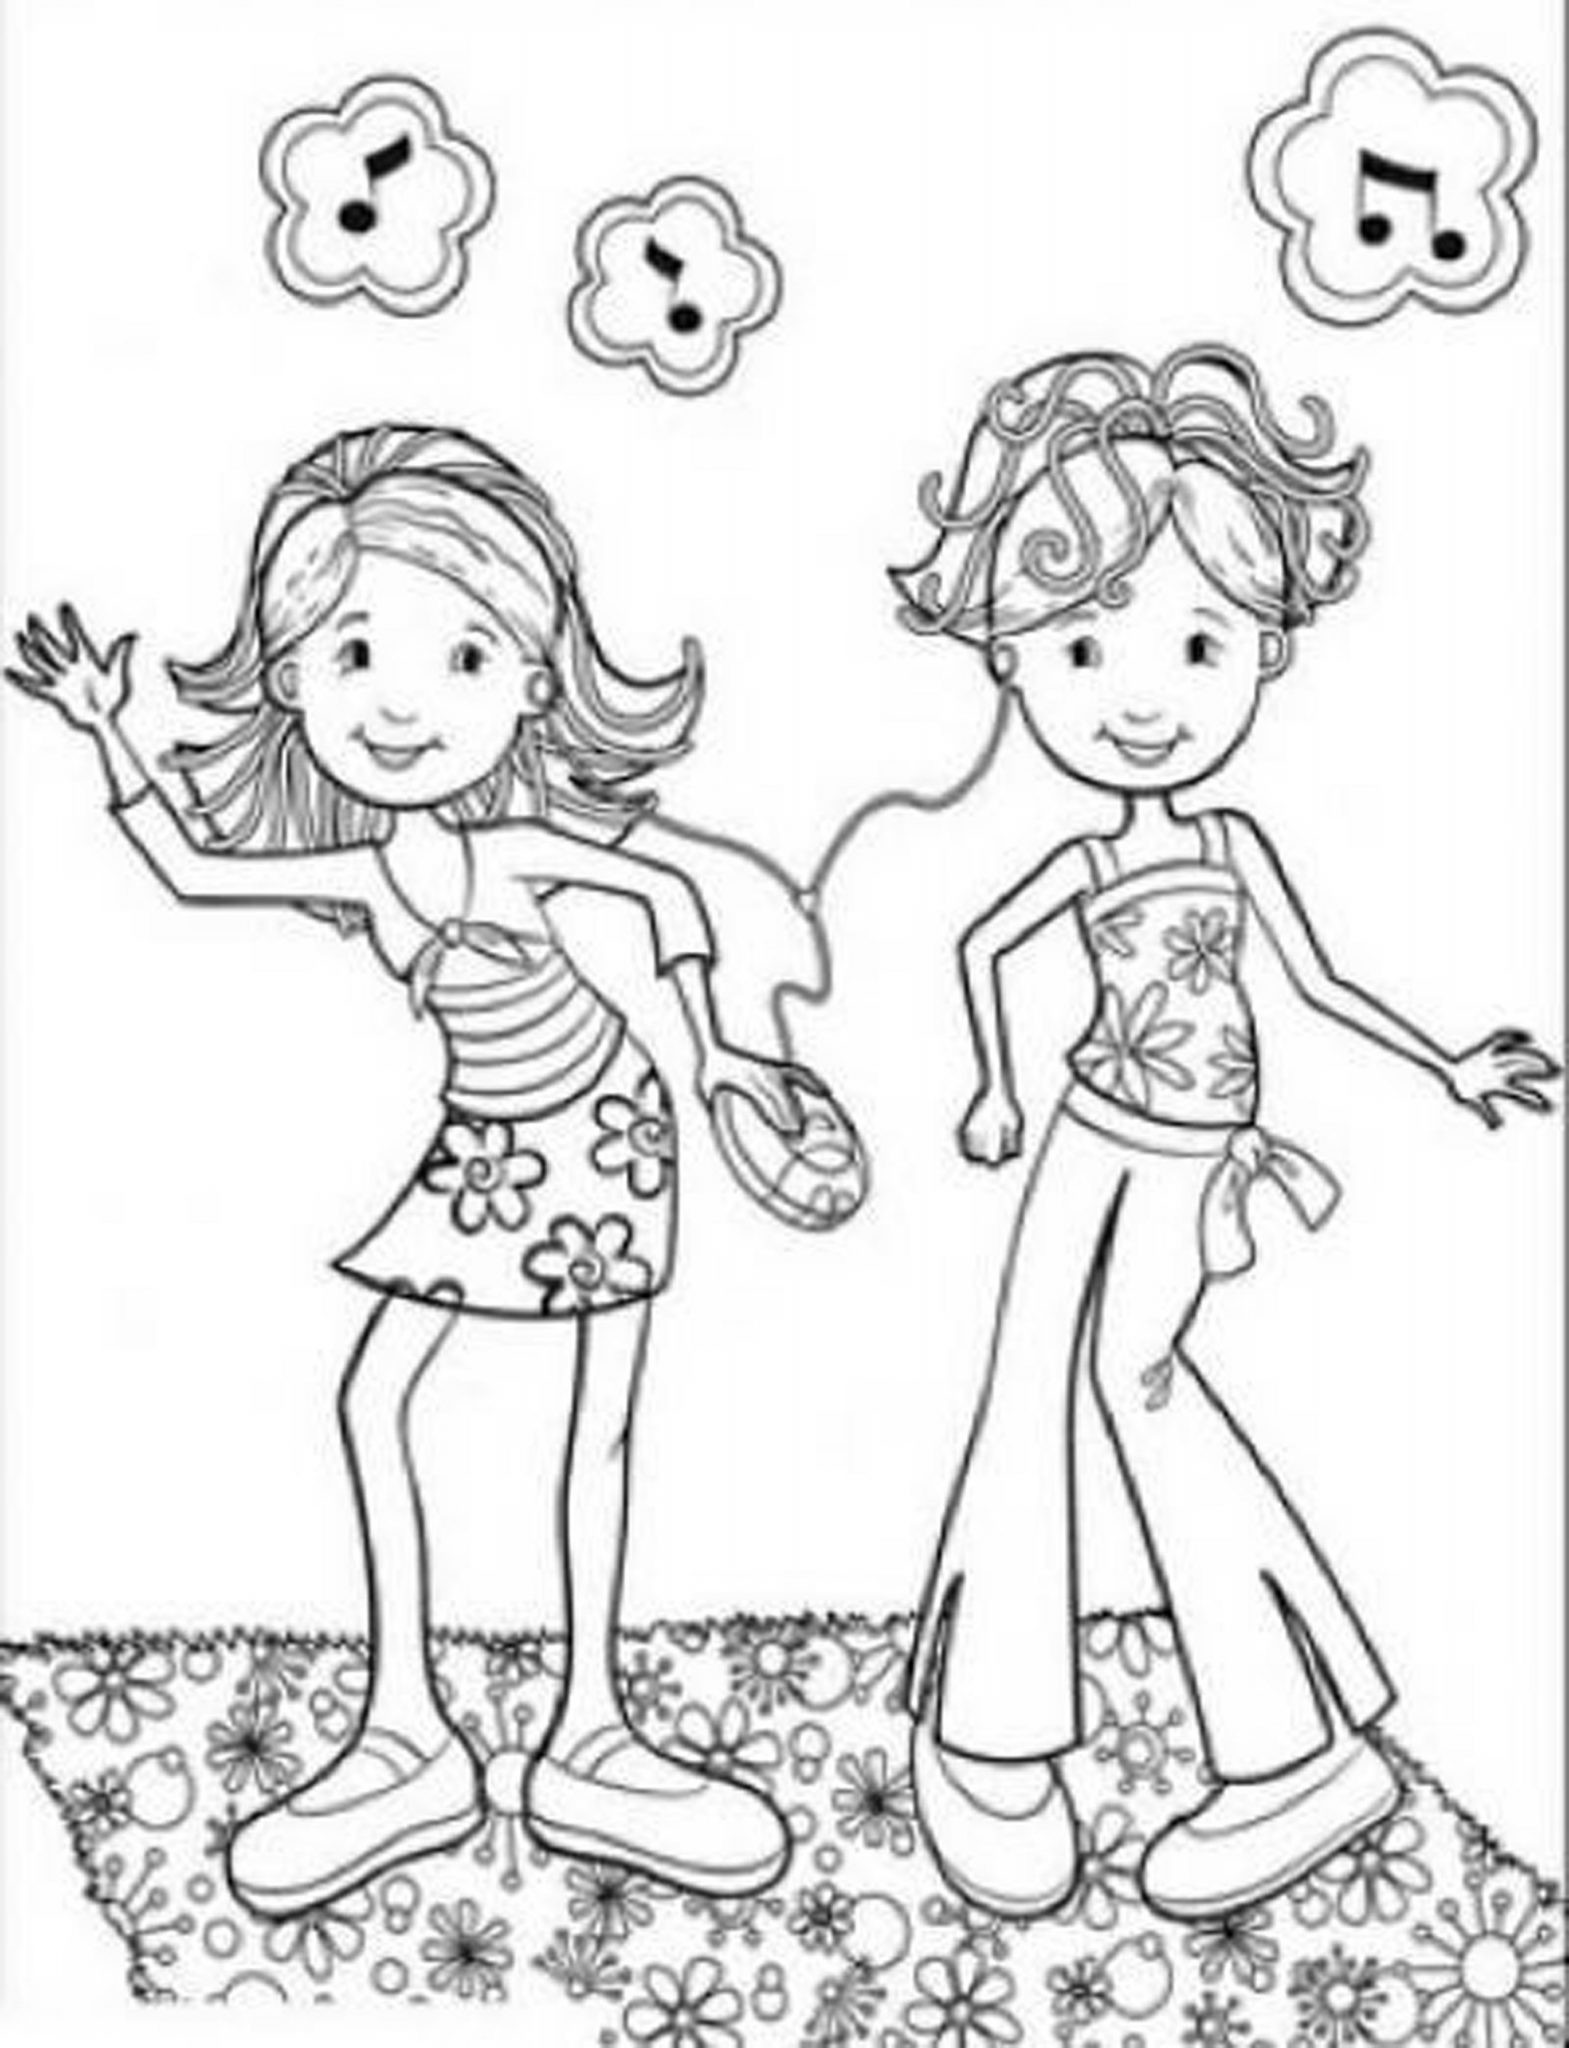 Cute Coloring Pages Of Girls
 cute coloring pages for girls